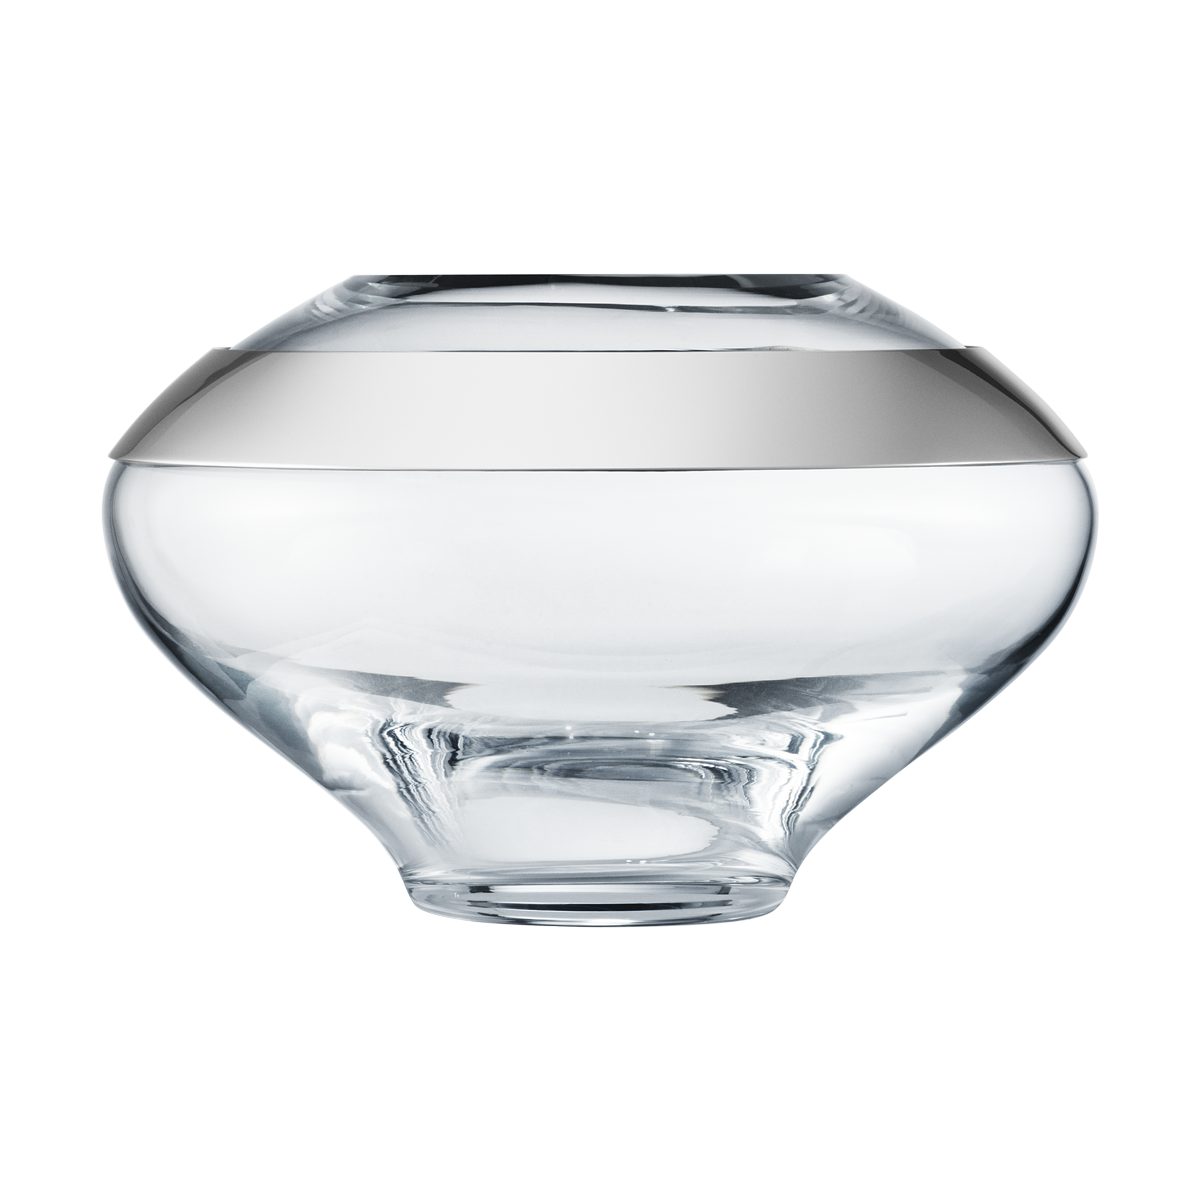 Duo by Georg Jensen Stainless Steel and Mouth Blown Glass Vase Small - New - $117.81